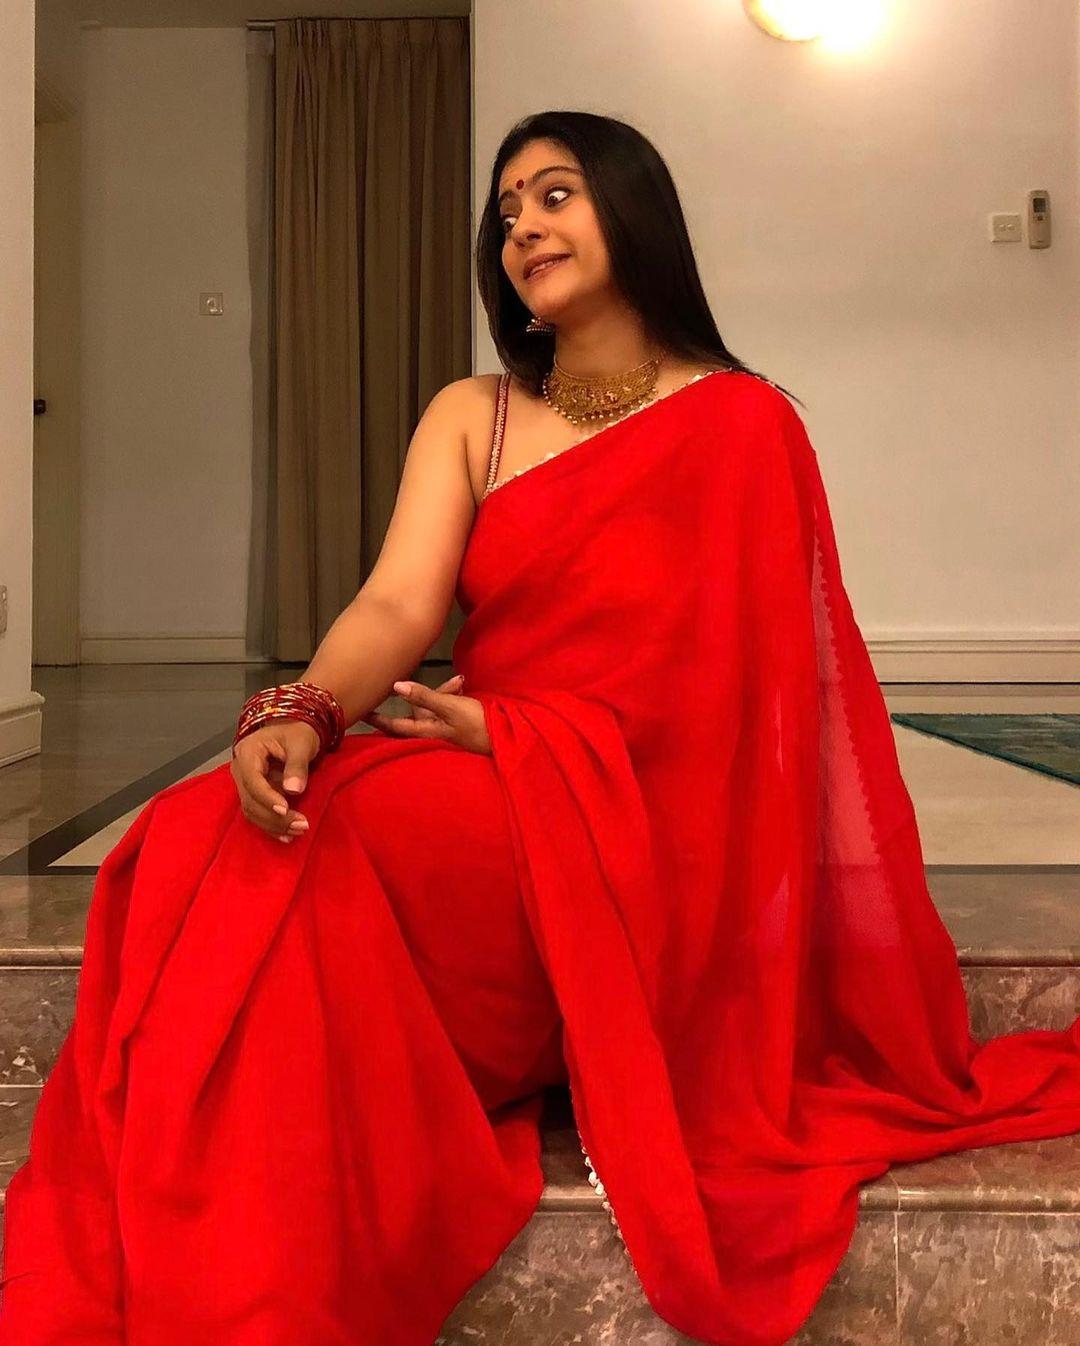 Bollywood actress Kajol devgan in red saree and sleeveless blouse hot photos | looking very glamorous photos Photos: HD Images, Pictures, Stills, First Look Posters of Bollywood actress Kajol devgan in red